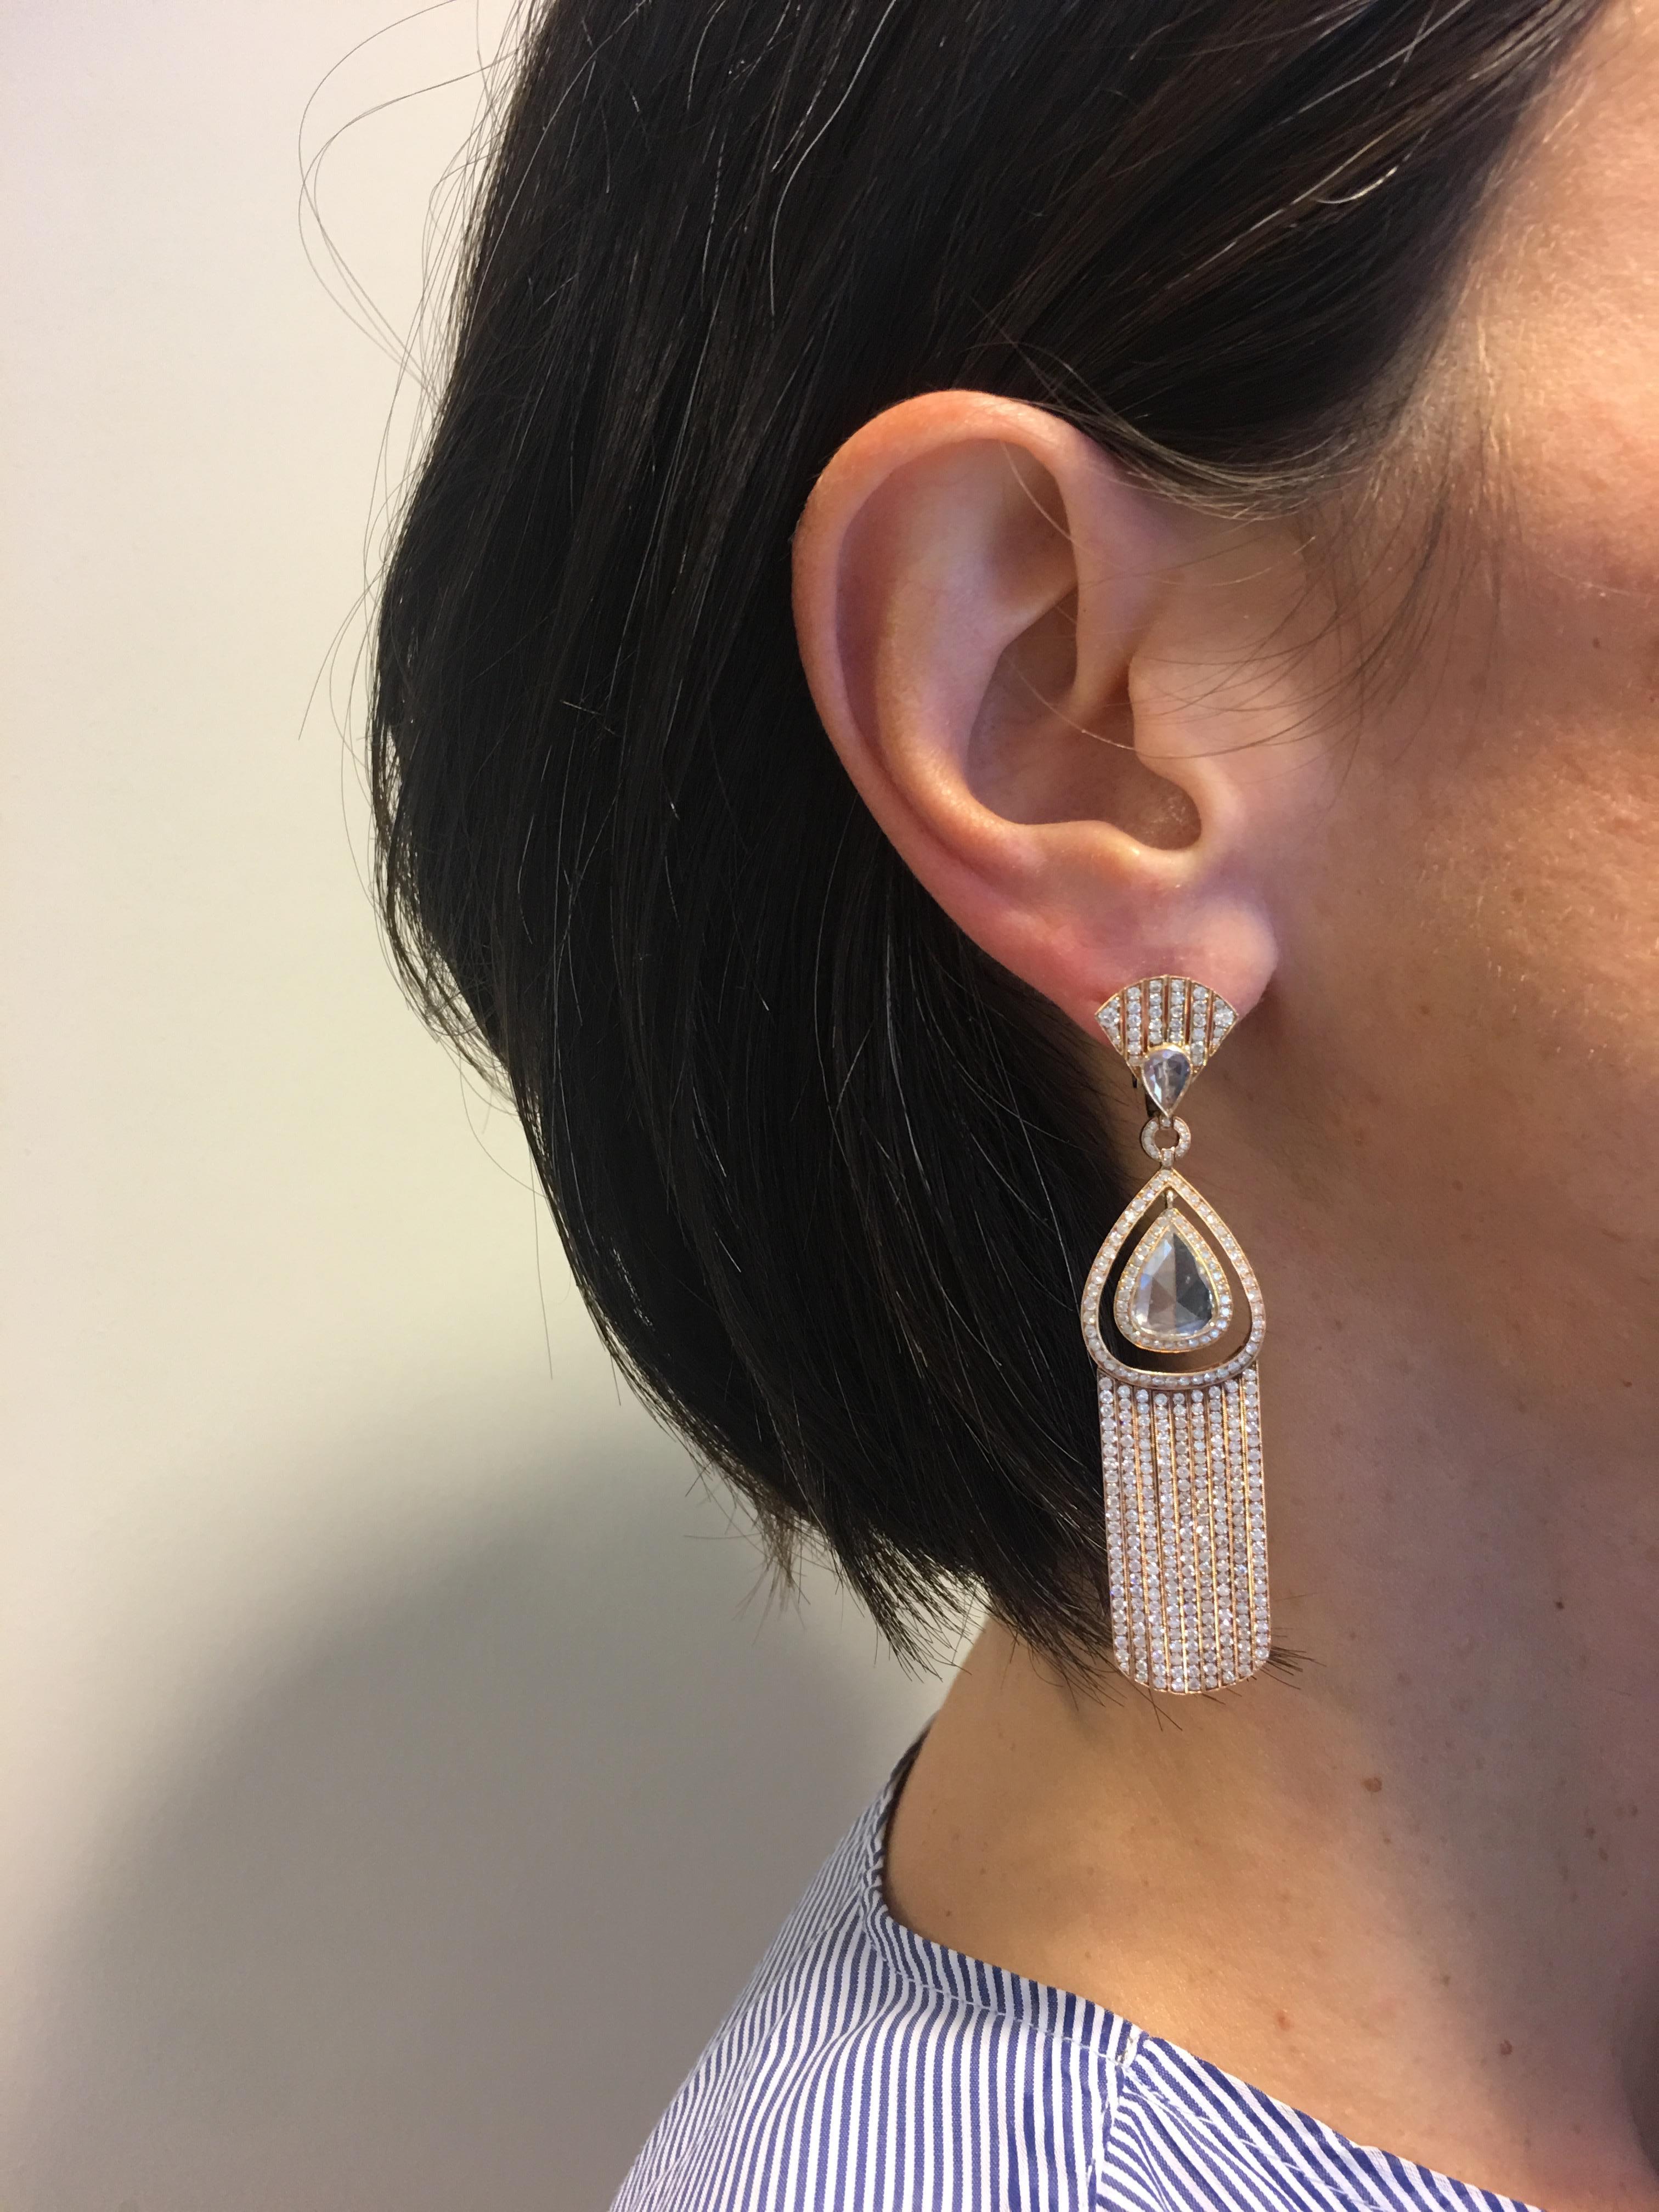 18 Karat Rose gold one of a kind earrings set with central pear-shaped rose cut diamonds: one is 1.30 carats and the other is 0.98 carats, further two pear-shaped rose cut diamonds of 0.85 carats and 662 brilliant cut diamonds with the total weight